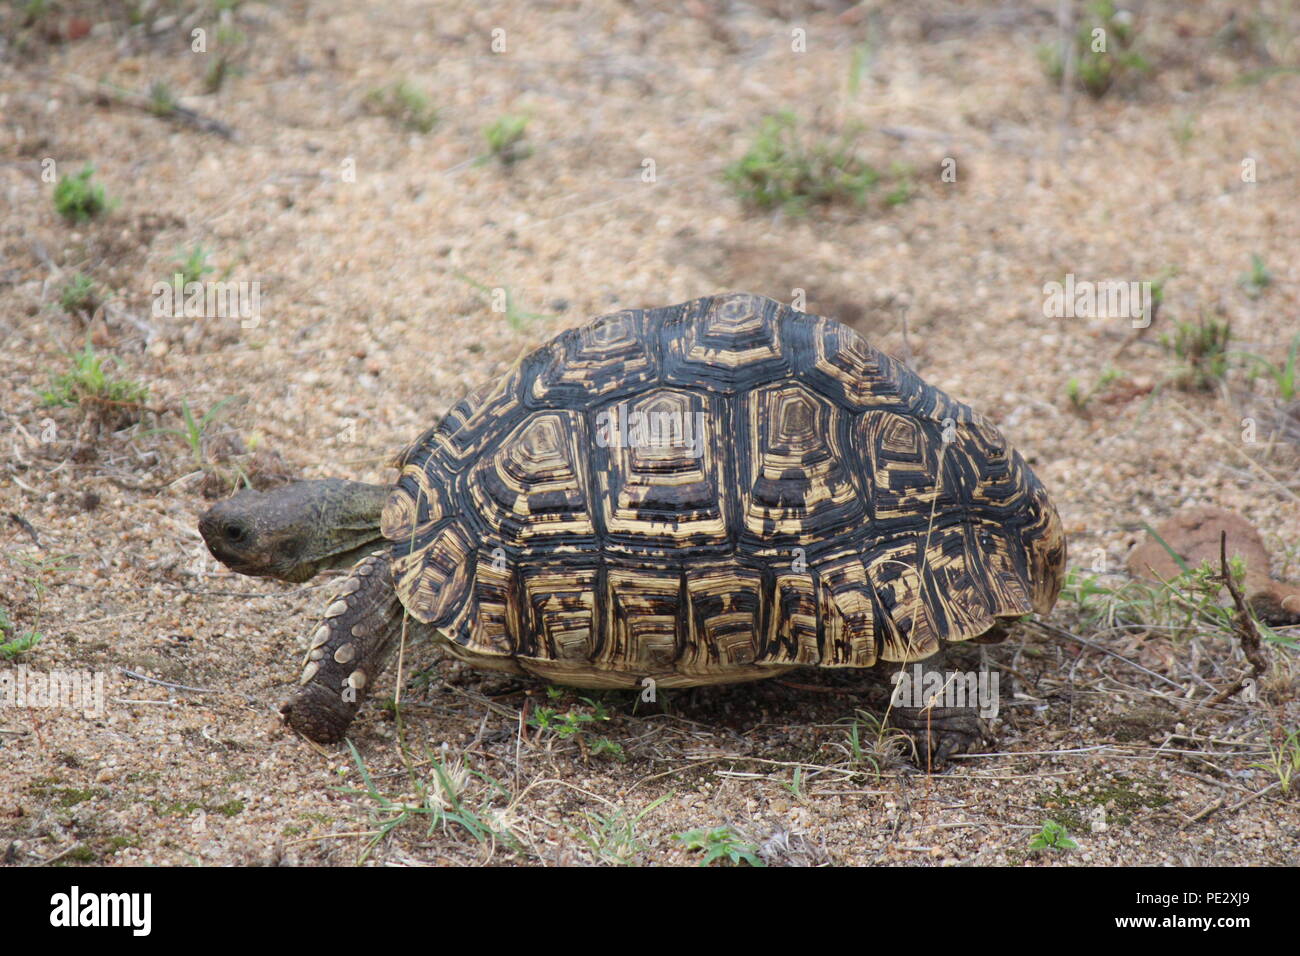 A turtle in the Kruger Park in South Africa Stock Photo